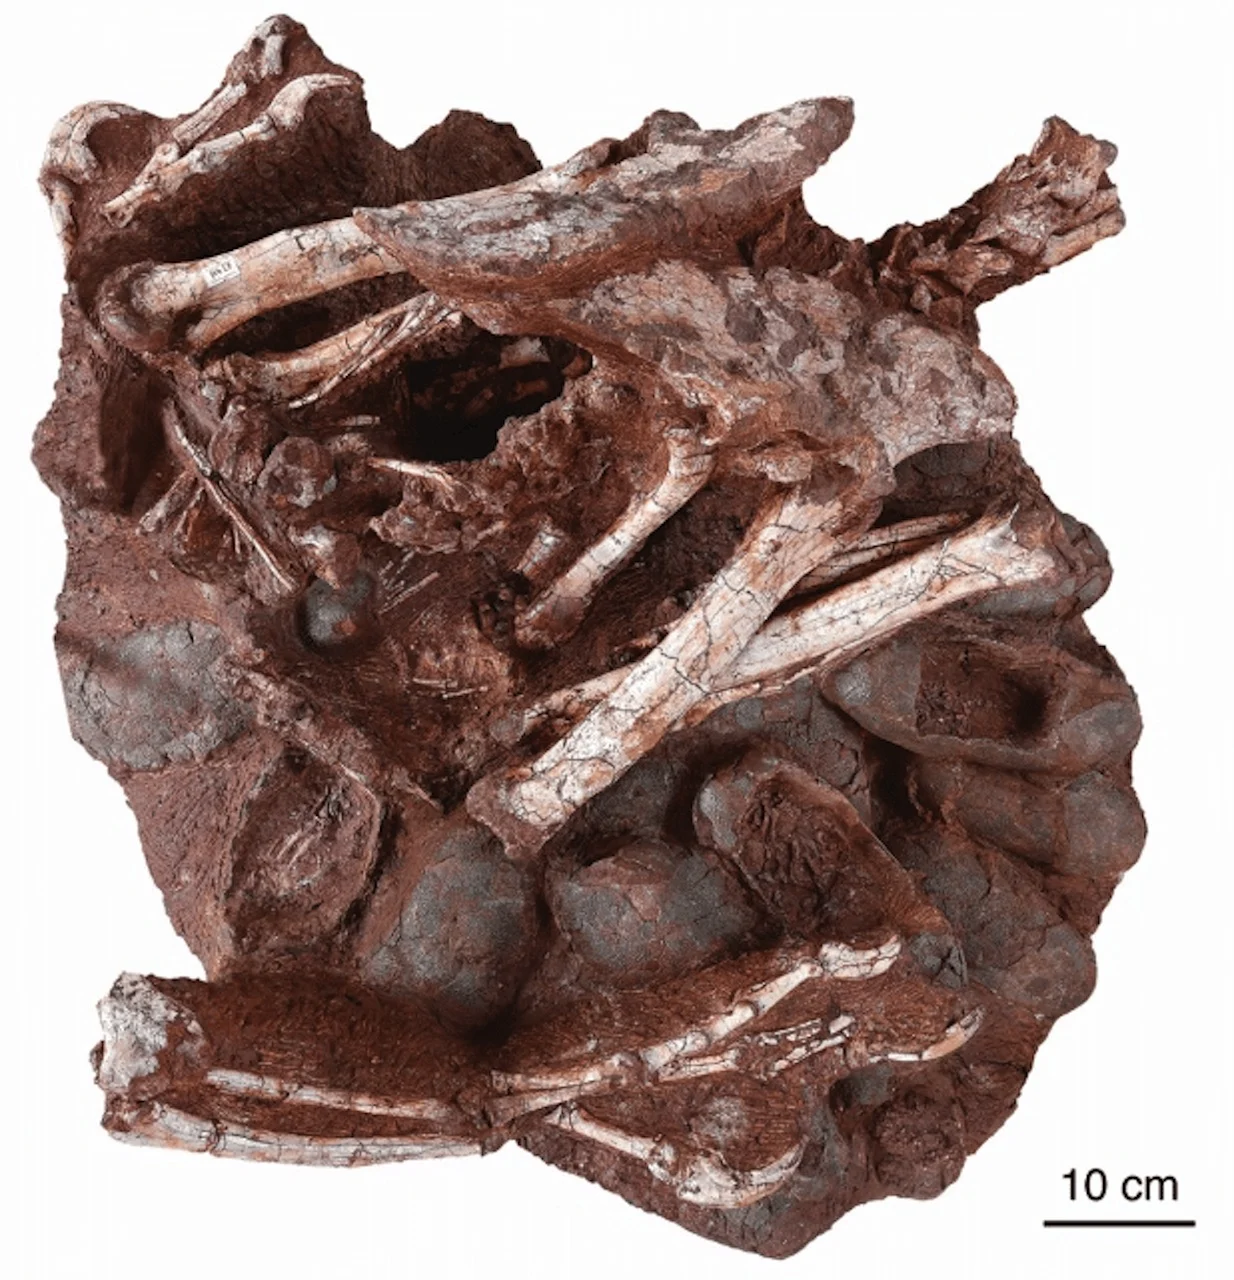 Dinosaur fossil atop nest with eggs is world's first, scientists say